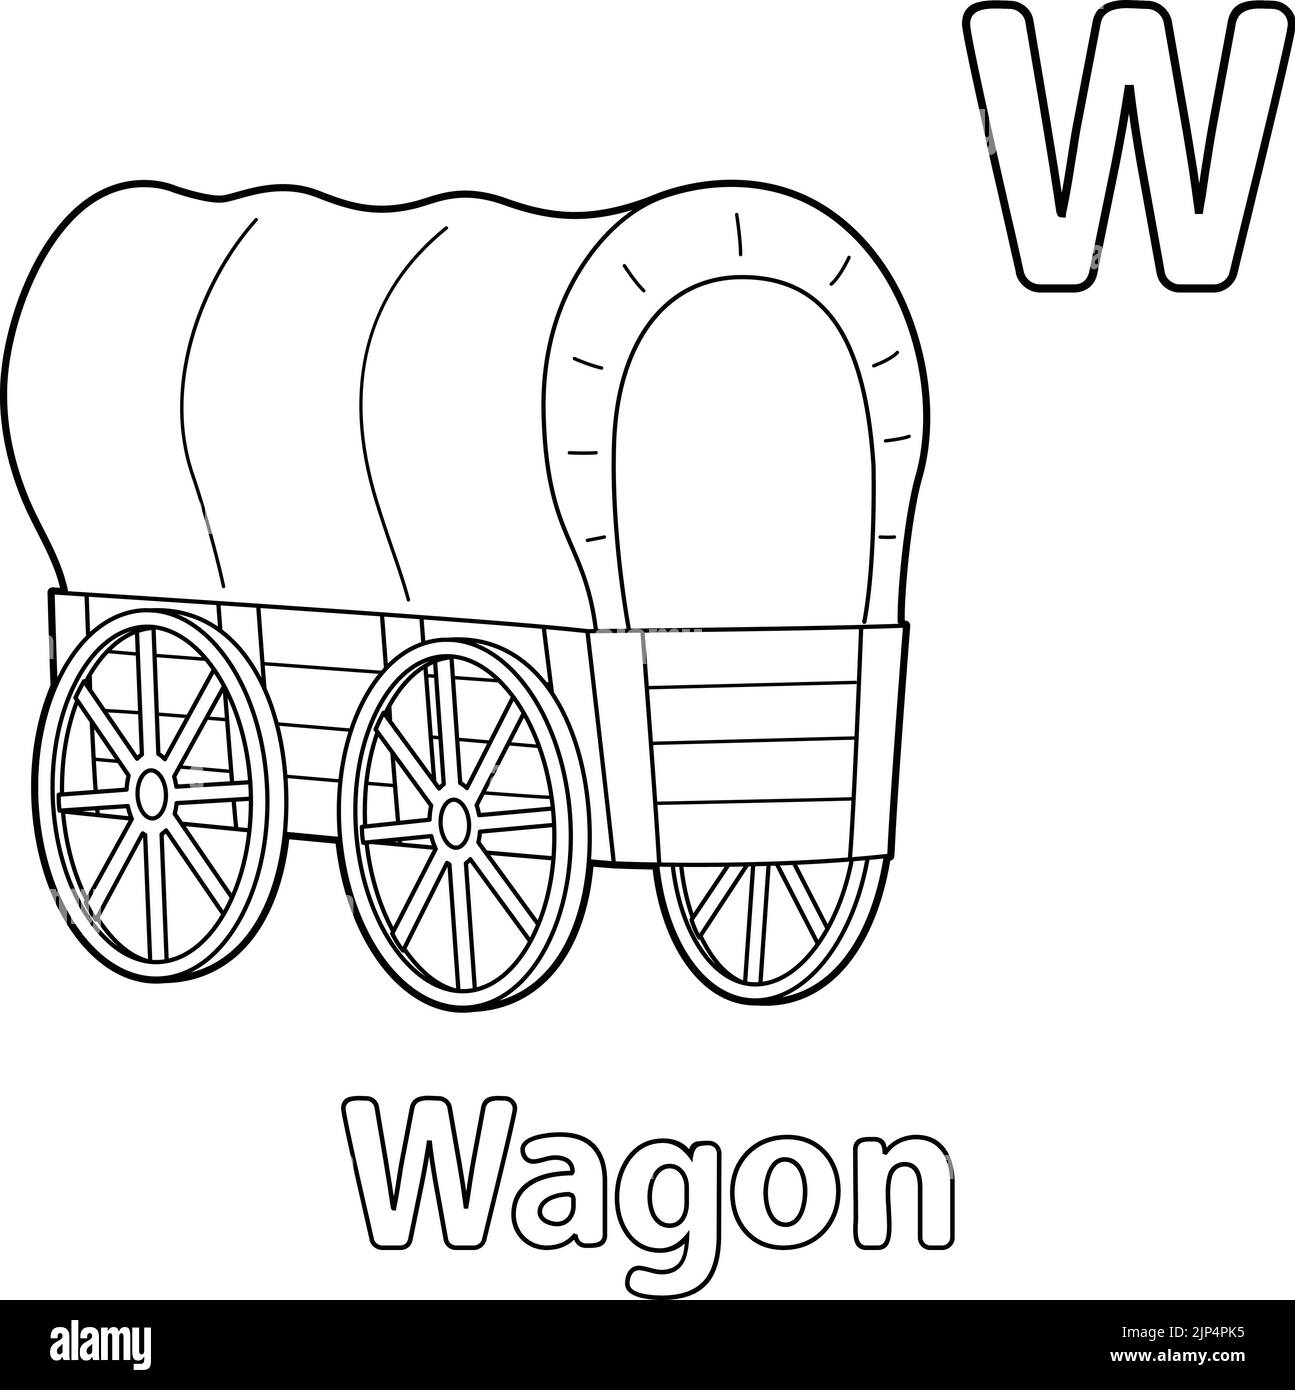 Wagon Alphabet ABC Coloring Page W Stock Vector